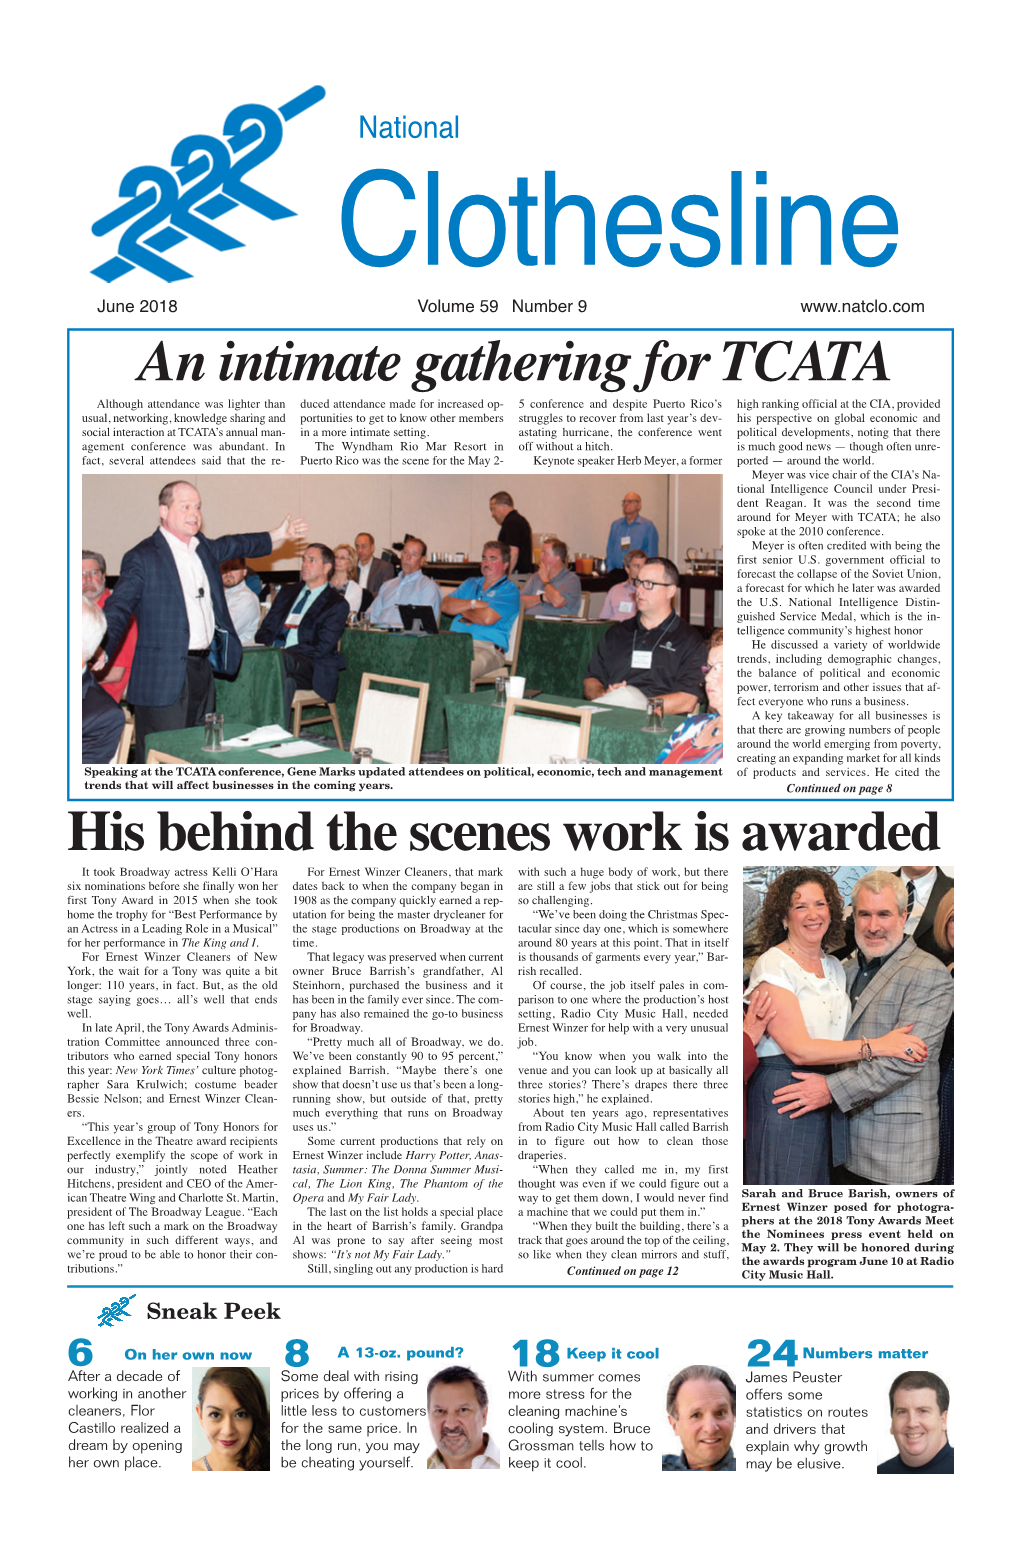 An Intimate Gathering for TCATA